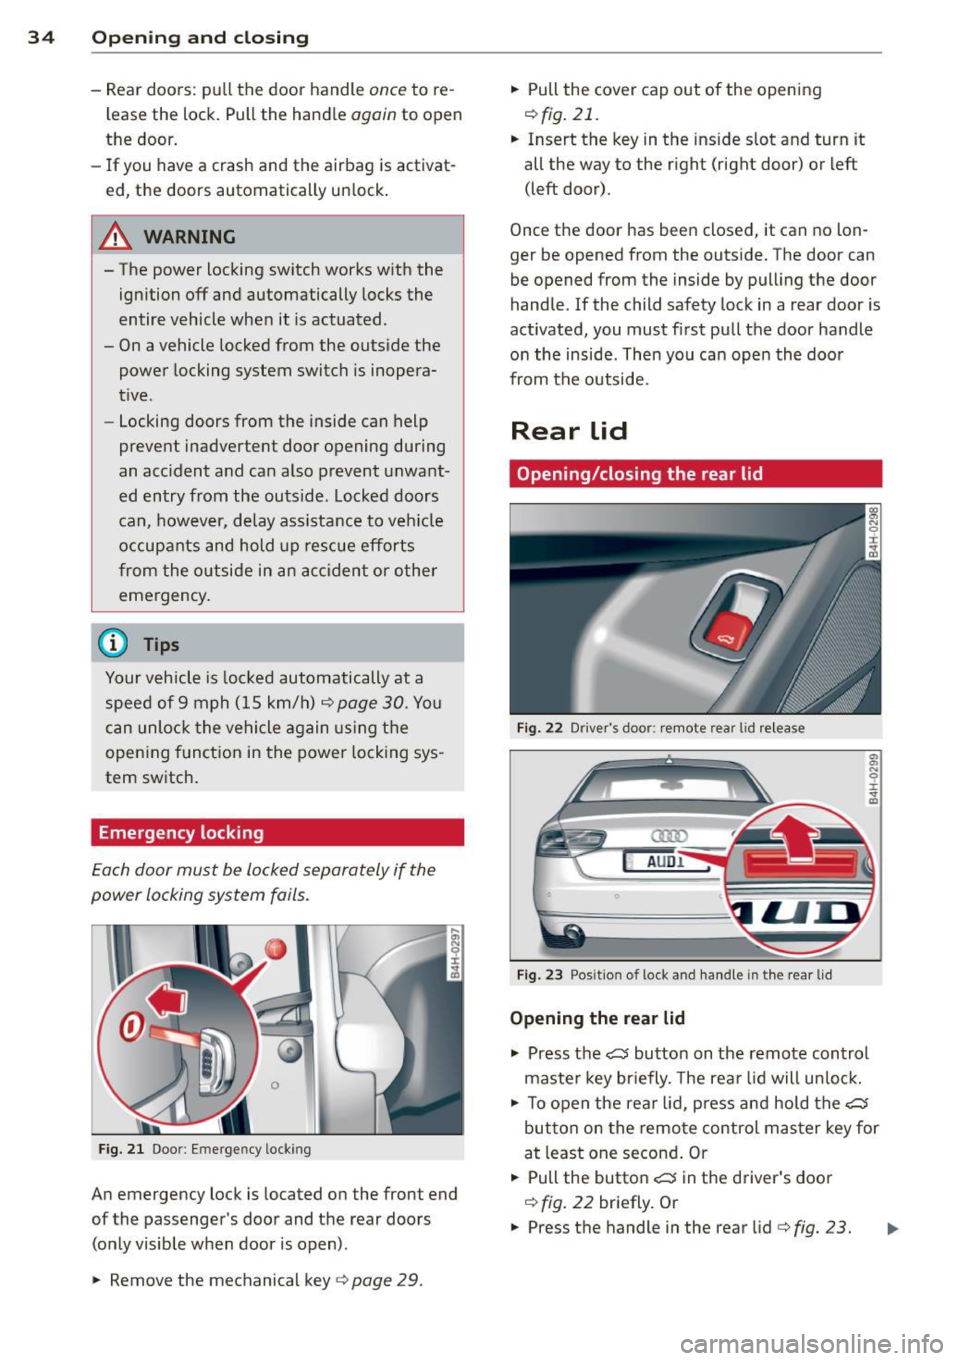 AUDI A8 2012  Owners Manual 34  Opening and  closing 
- Rear  doors : pu ll the  door  handle once to  re­
l ease  the  lock.  Pull  the  handle 
again to  open 
the  door . 
- If you  have  a  crash  and  the  airbag  is activ